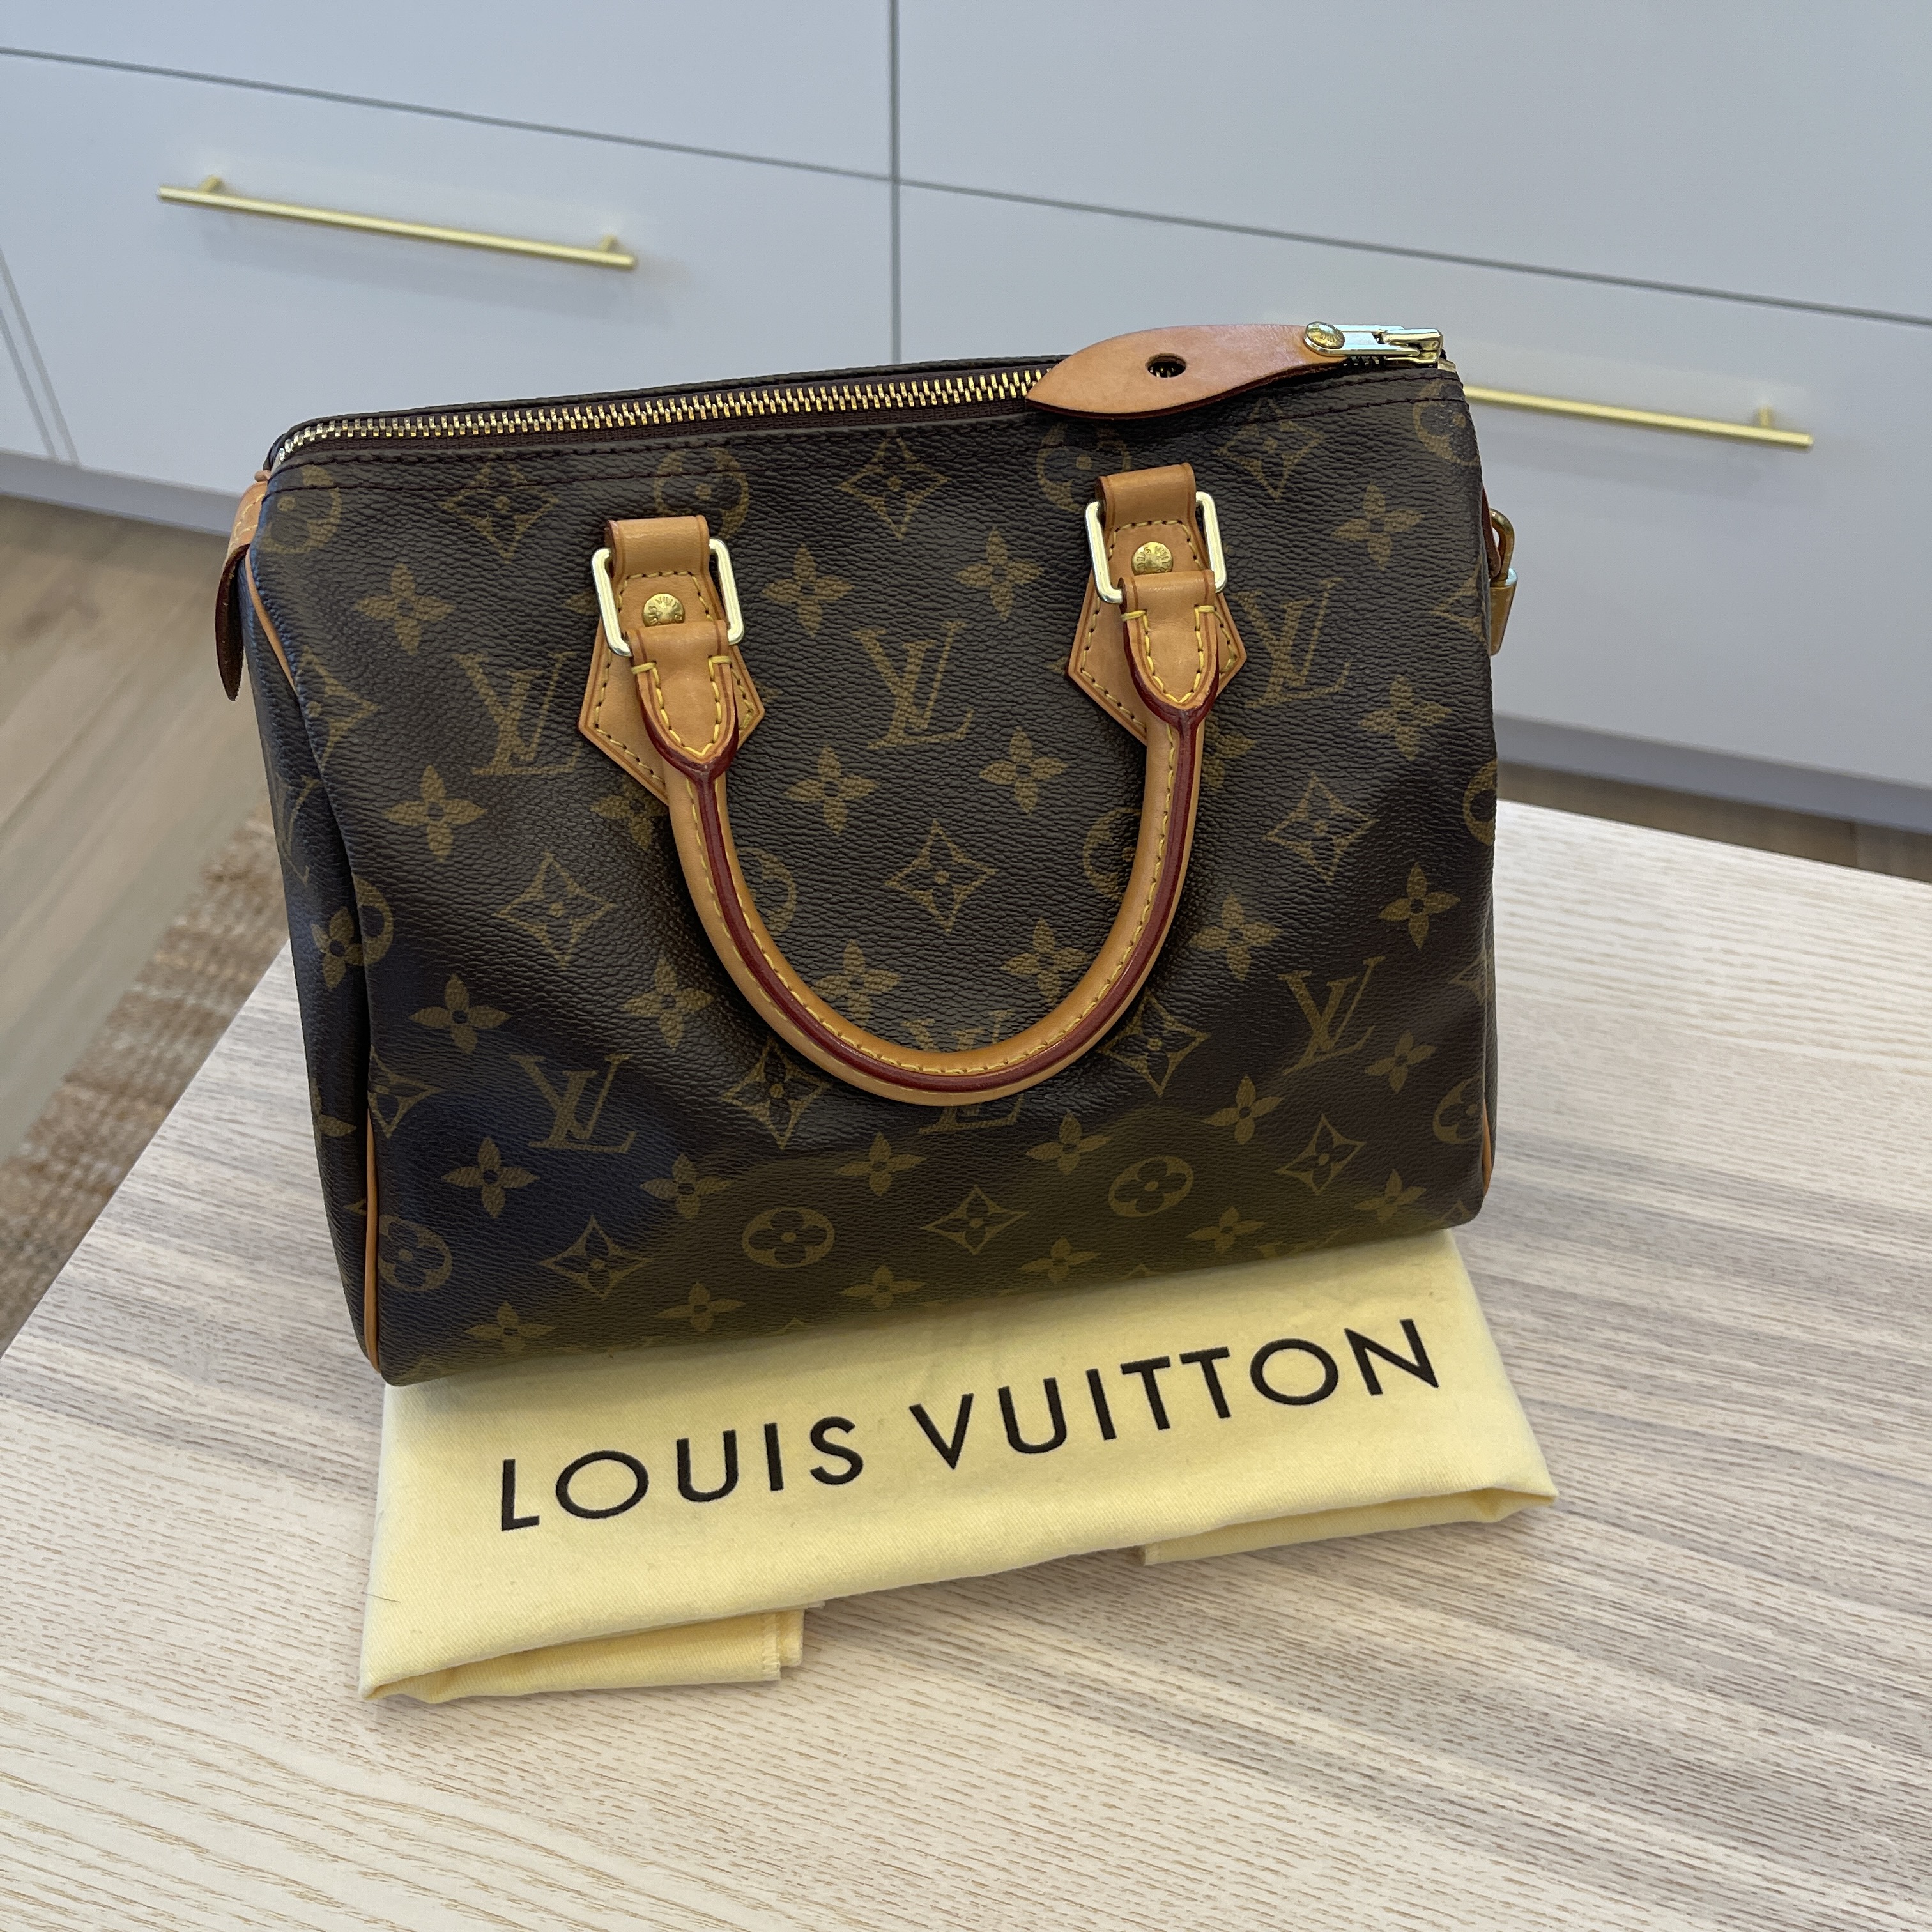 Clean, great condition Authentic LV Speedy 25